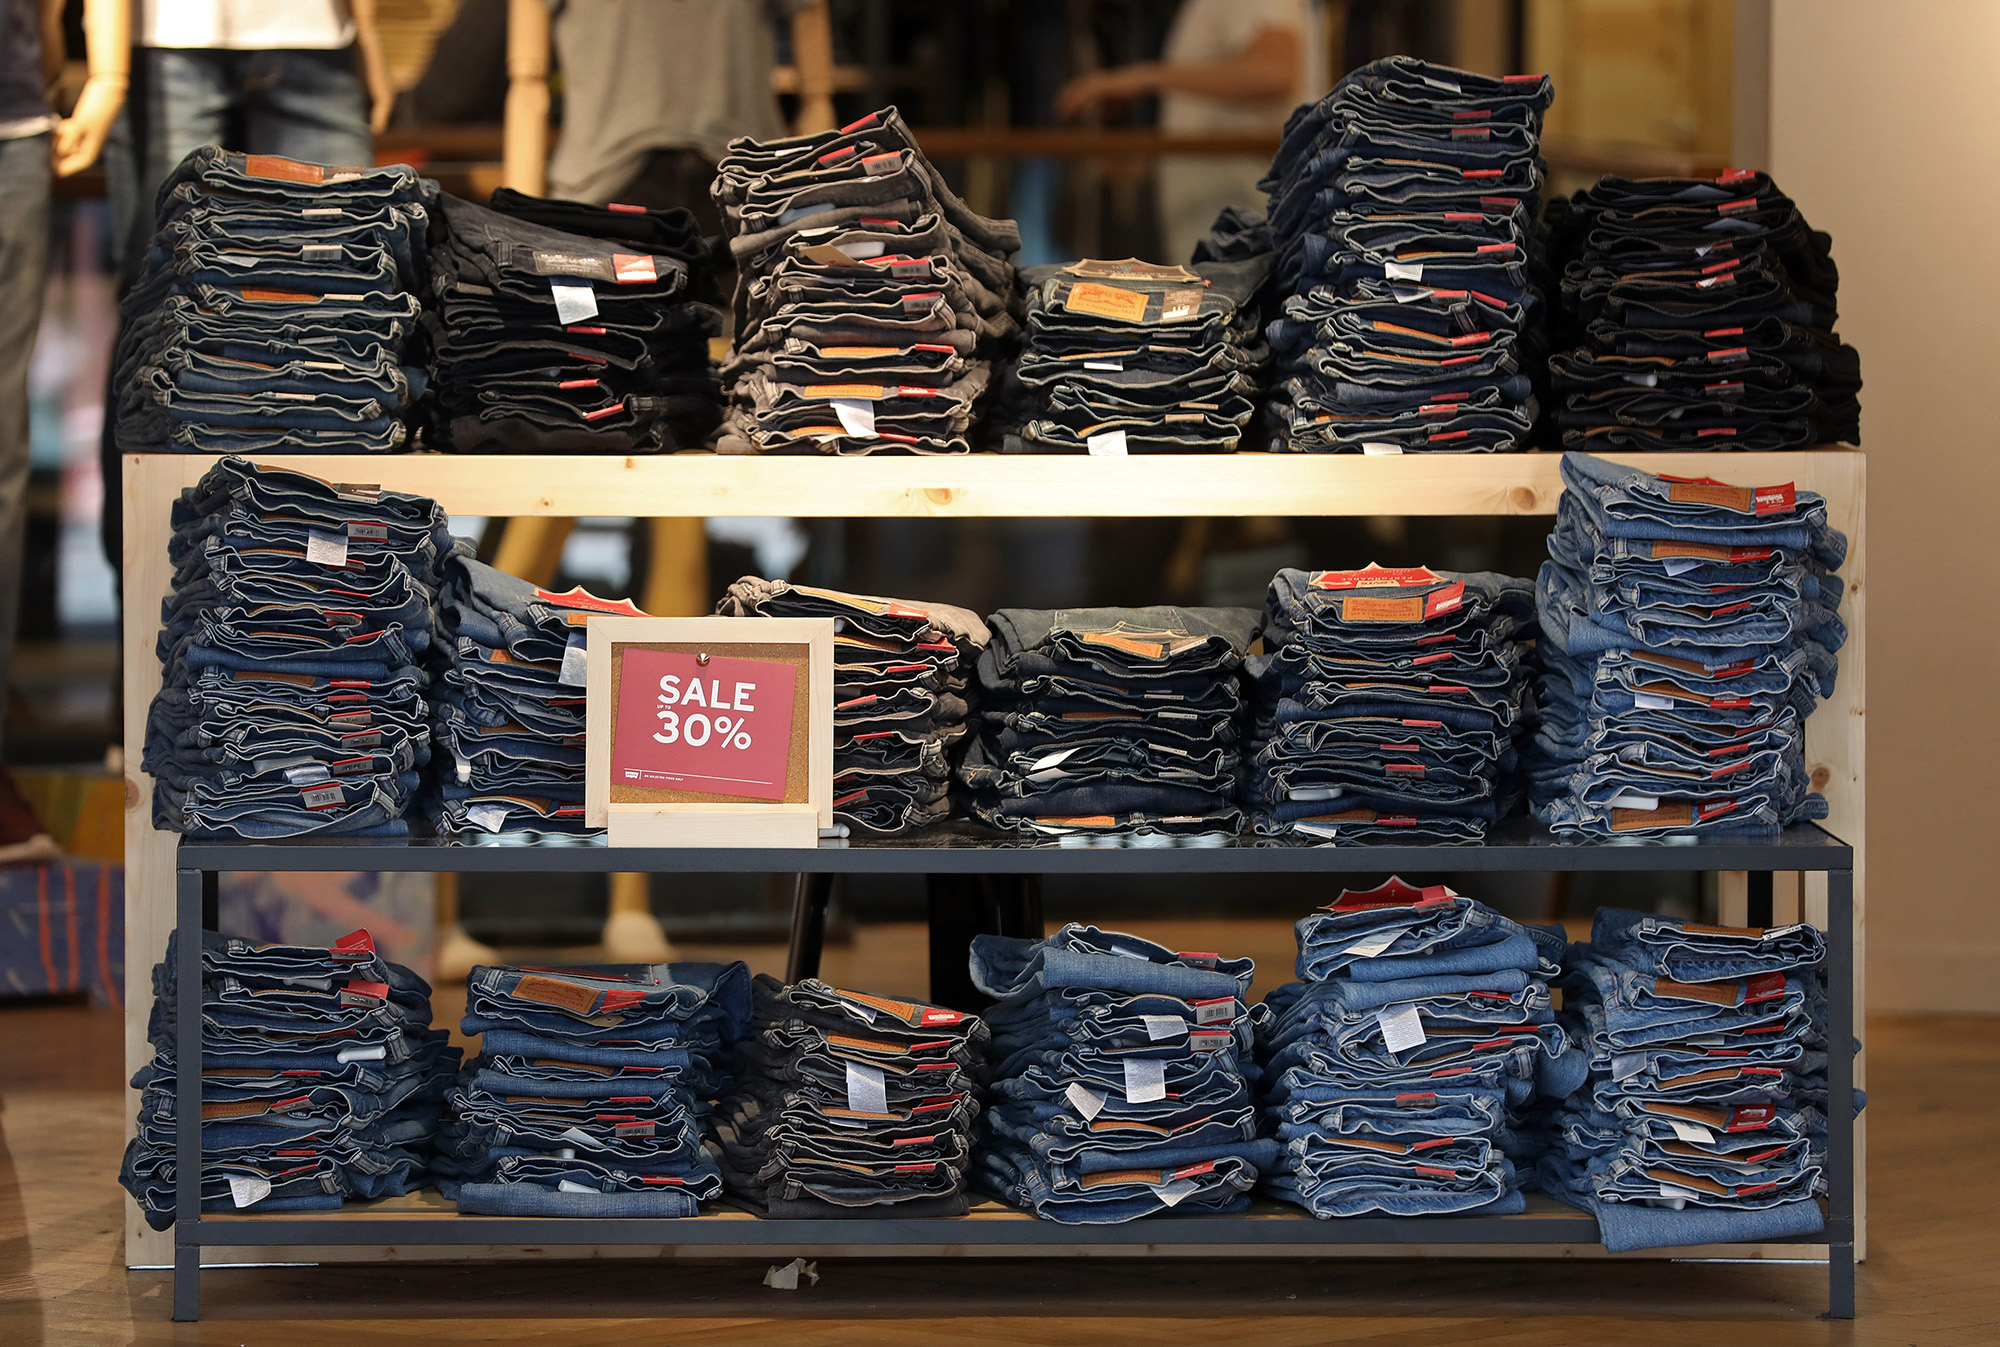 A $ Billion Blue Jeans Fortune Emerges With Levi's IPO Plan - Bloomberg